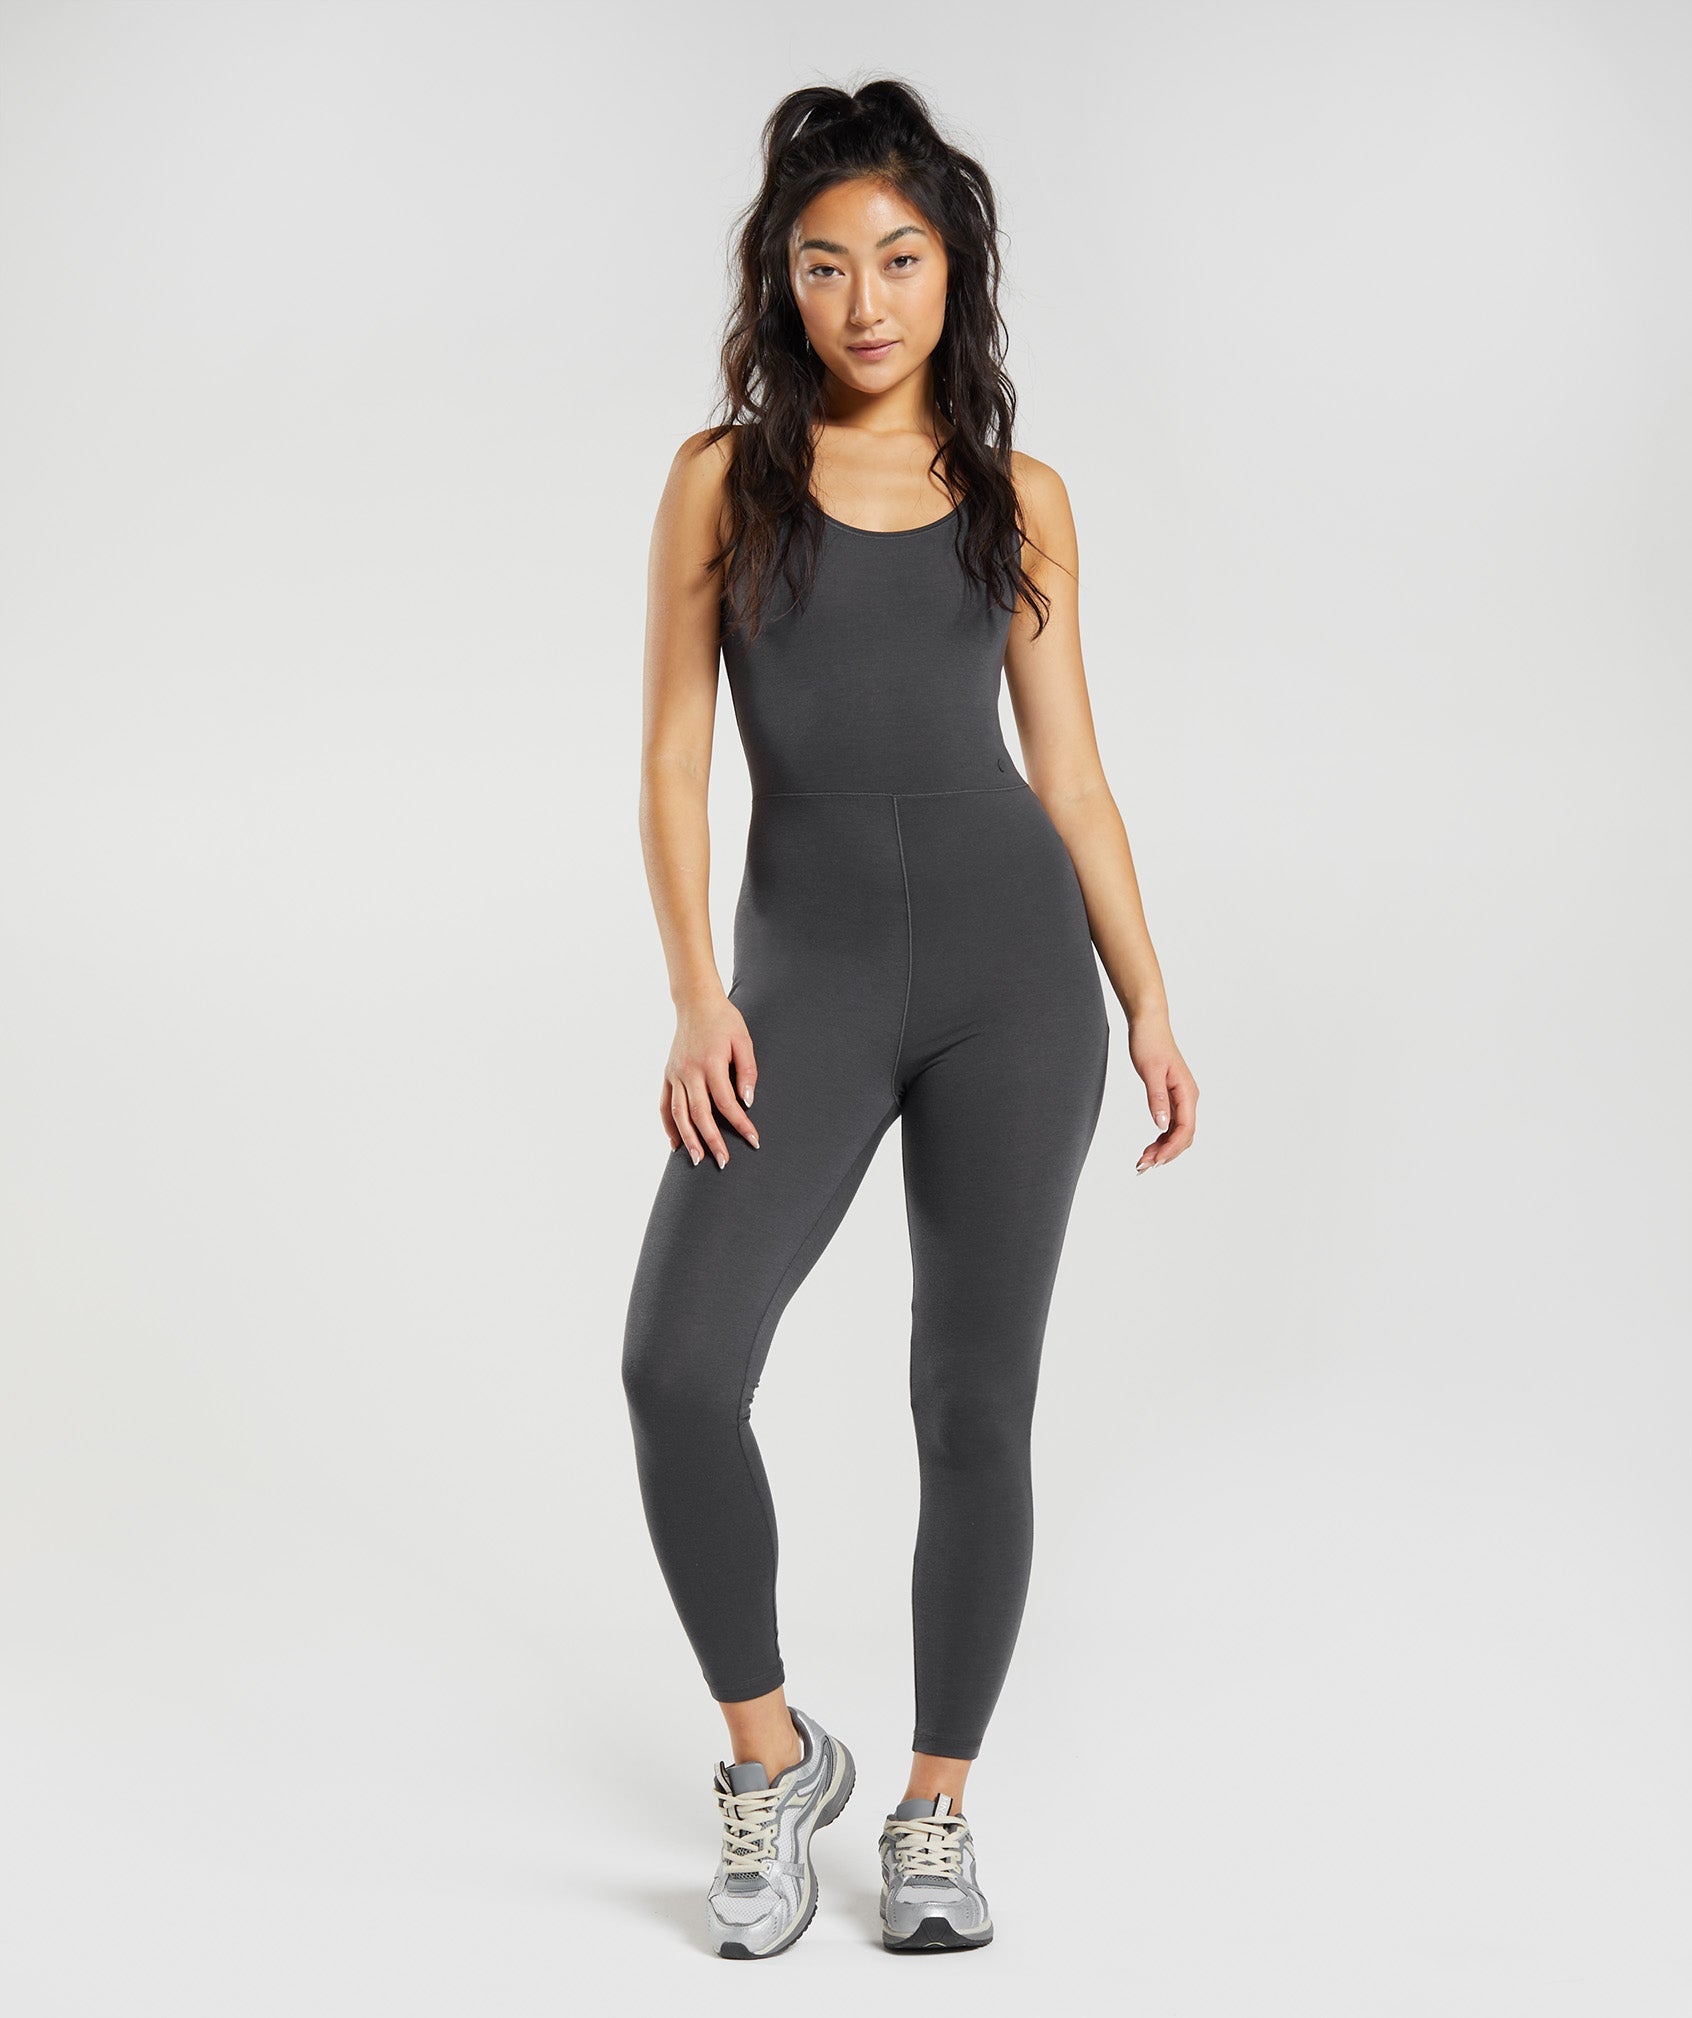 Gymshark Strappy All In One - Black